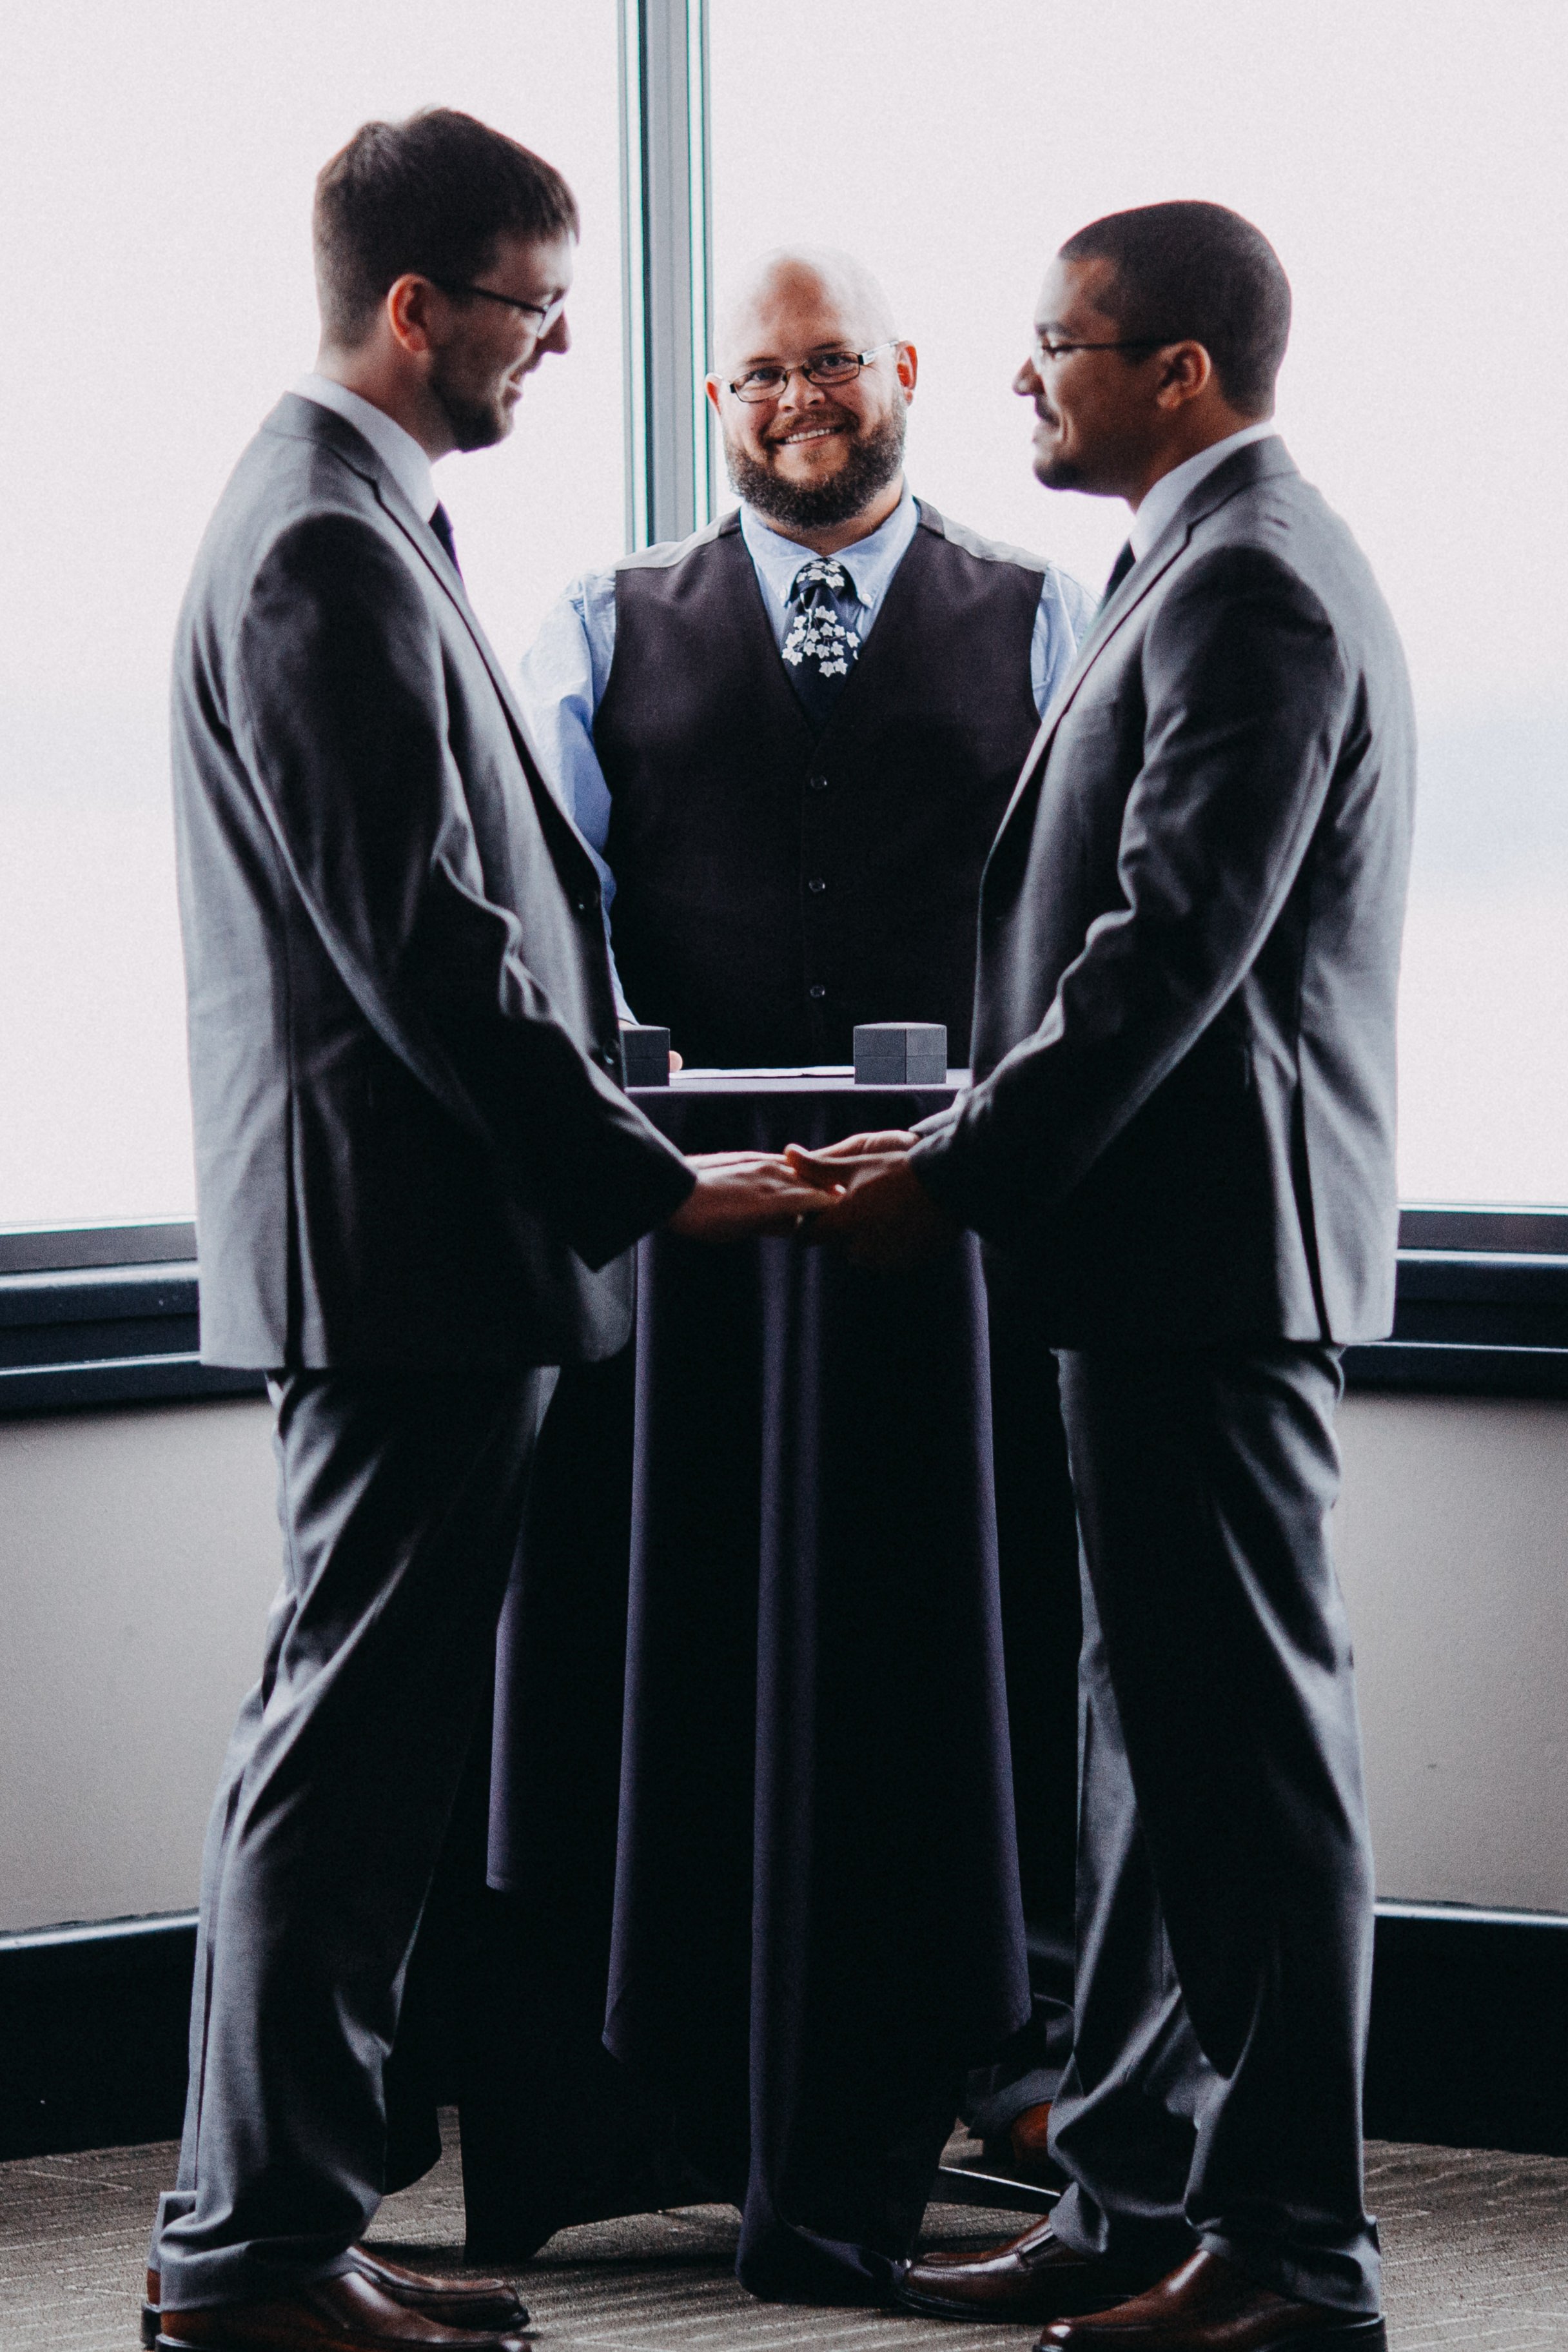  Two grooms hold hands during their wedding ceremony. Their officiant smiles behind them. 